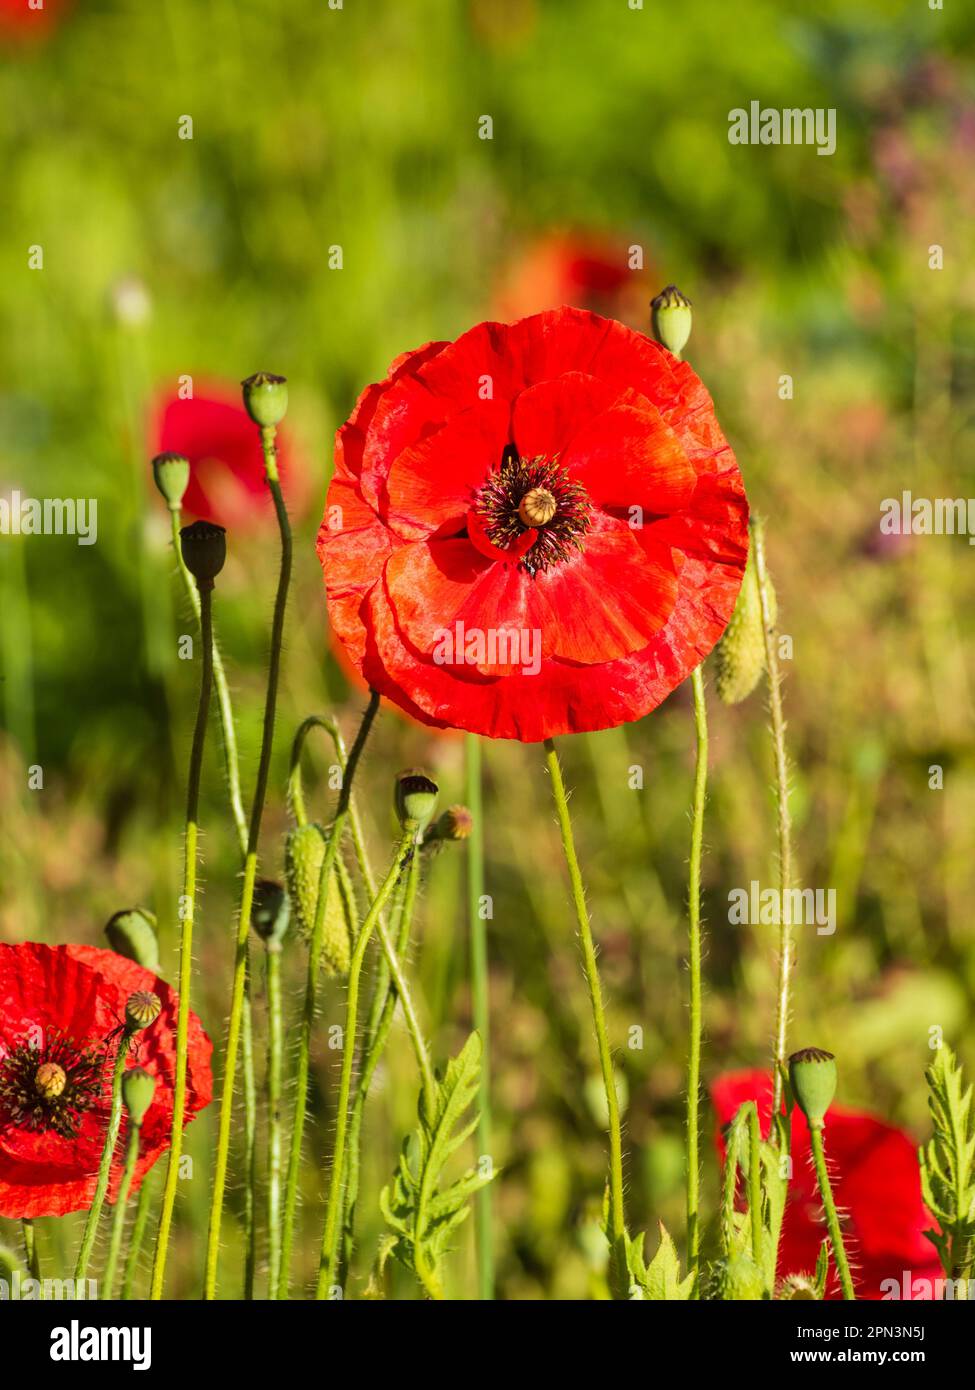 Red flower of the annual field poppy, Papaver rhoeas among developing seed pods Stock Photo